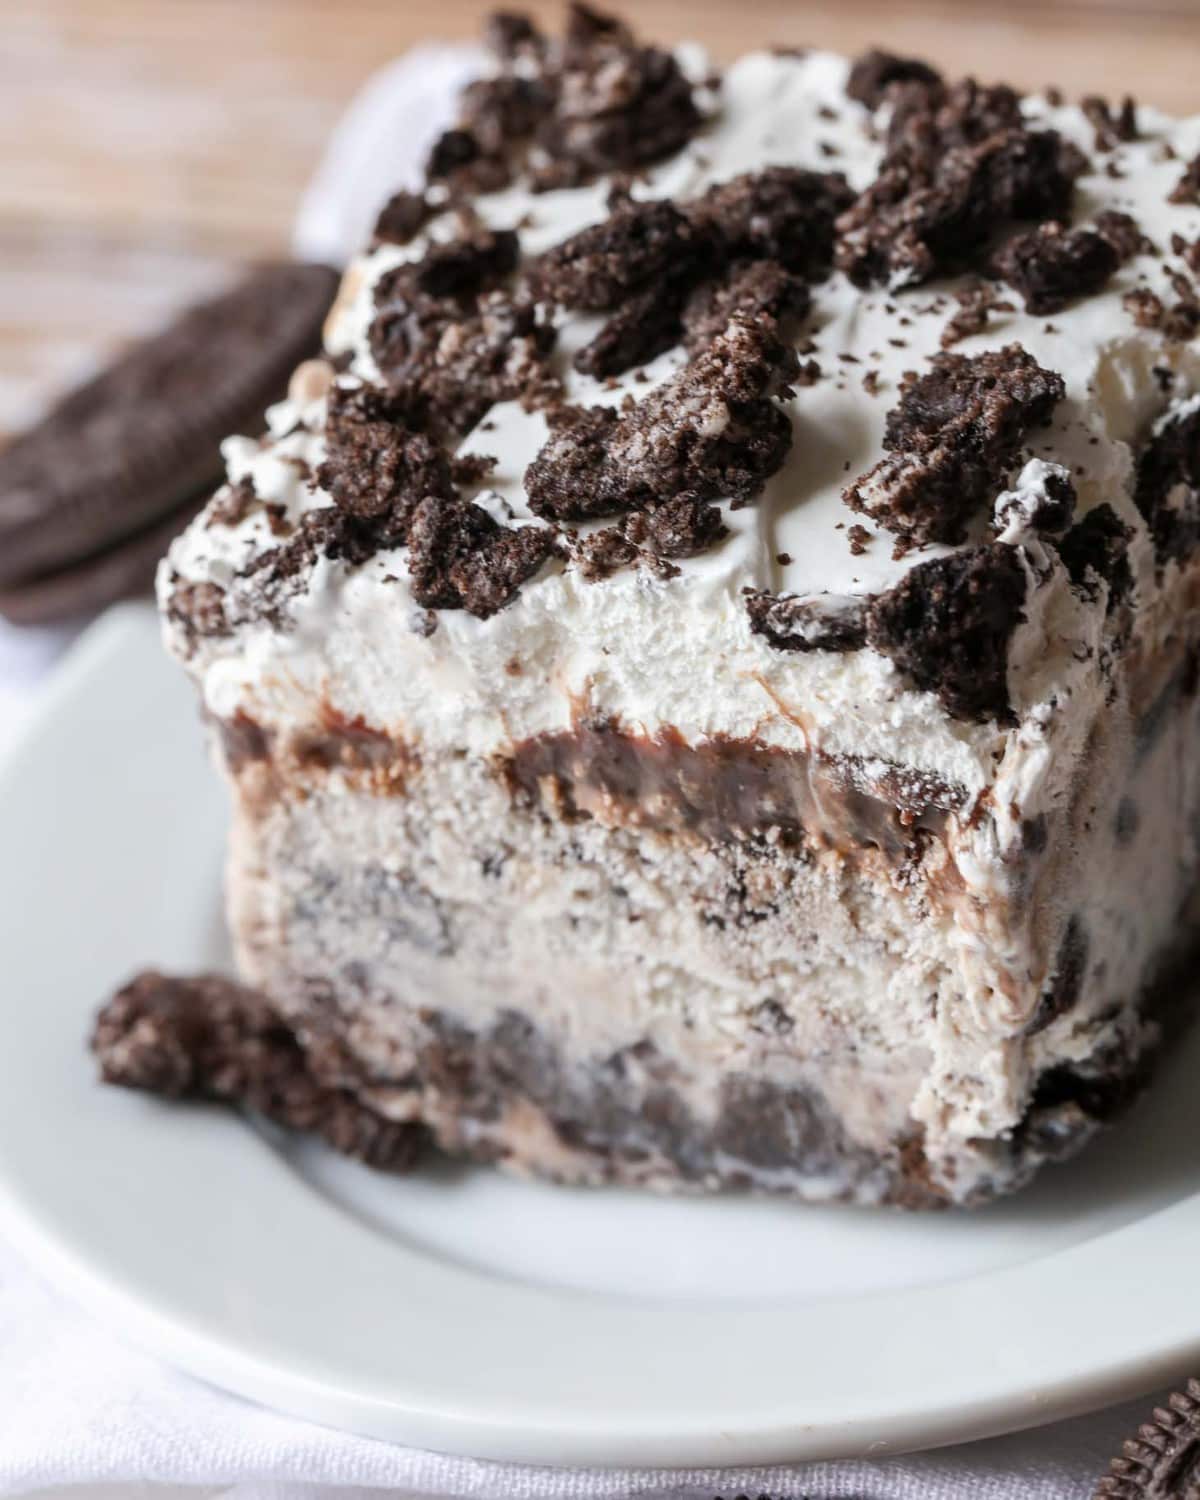 Easy Oreo Ice Cream Cake Recipe cut and served on a white plate.